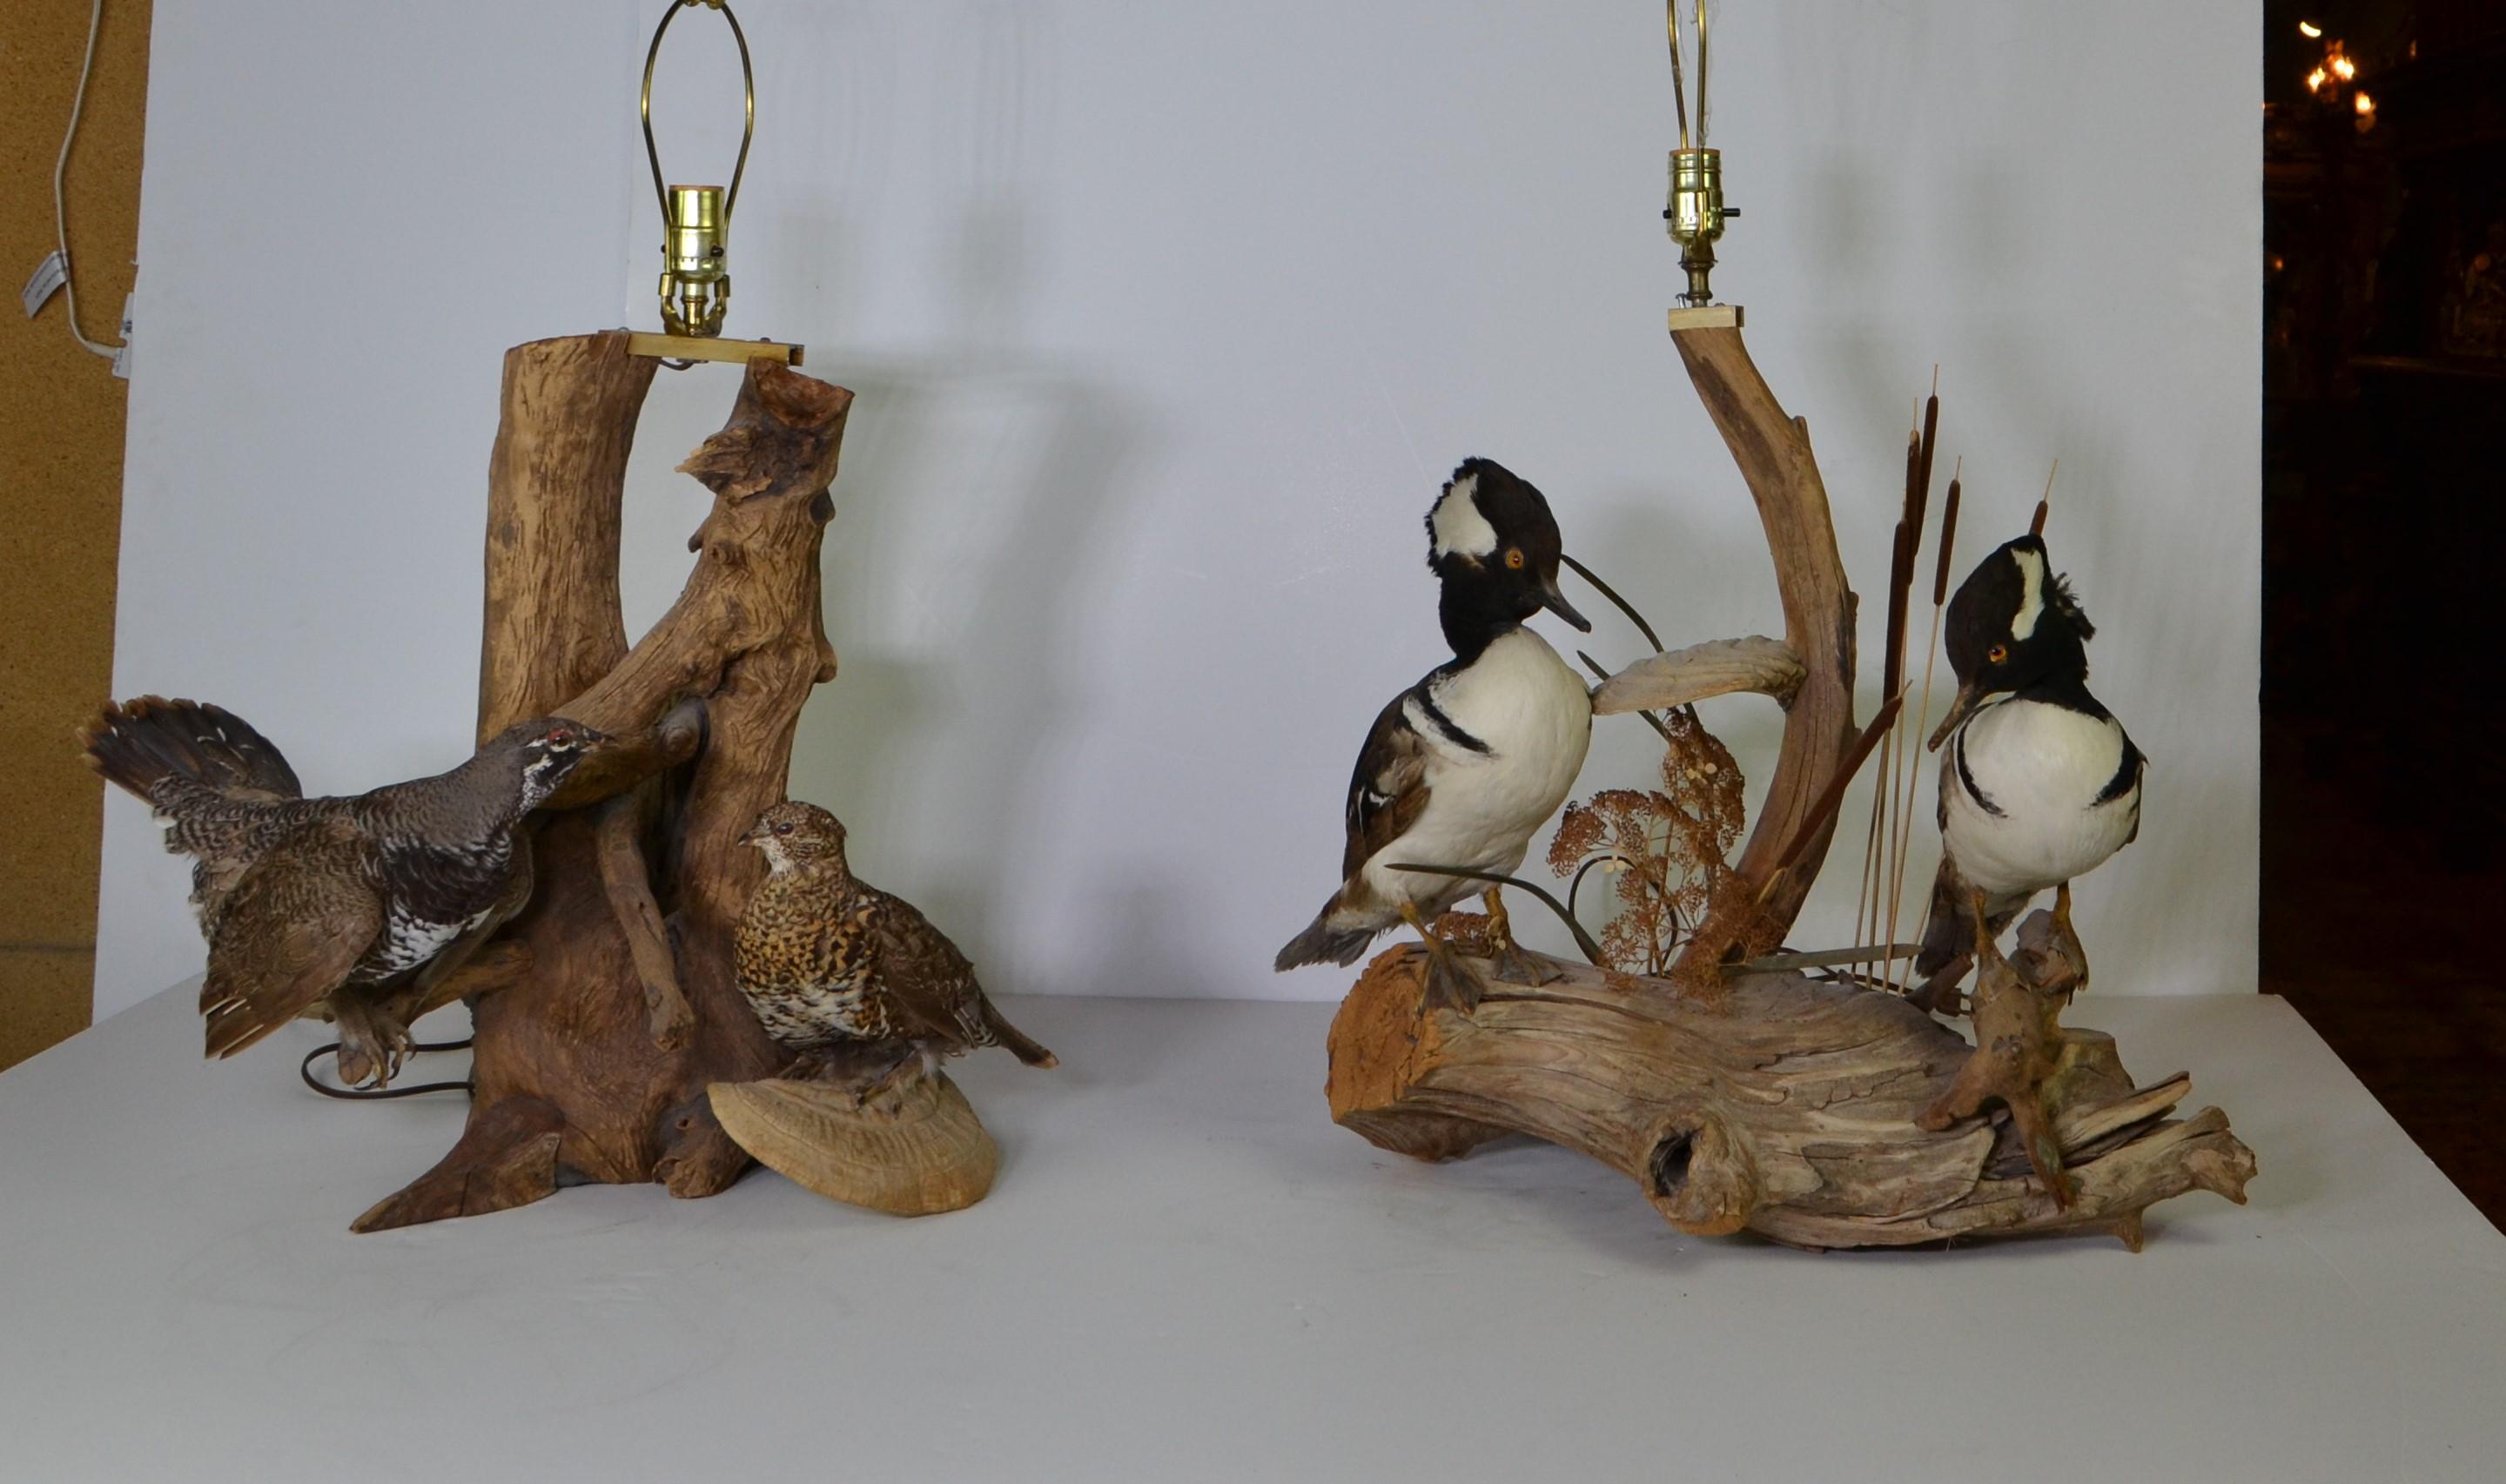 A wonderful pair of table tamps with exotic birds on driftwood bases. Excellent example of old taxidermy.